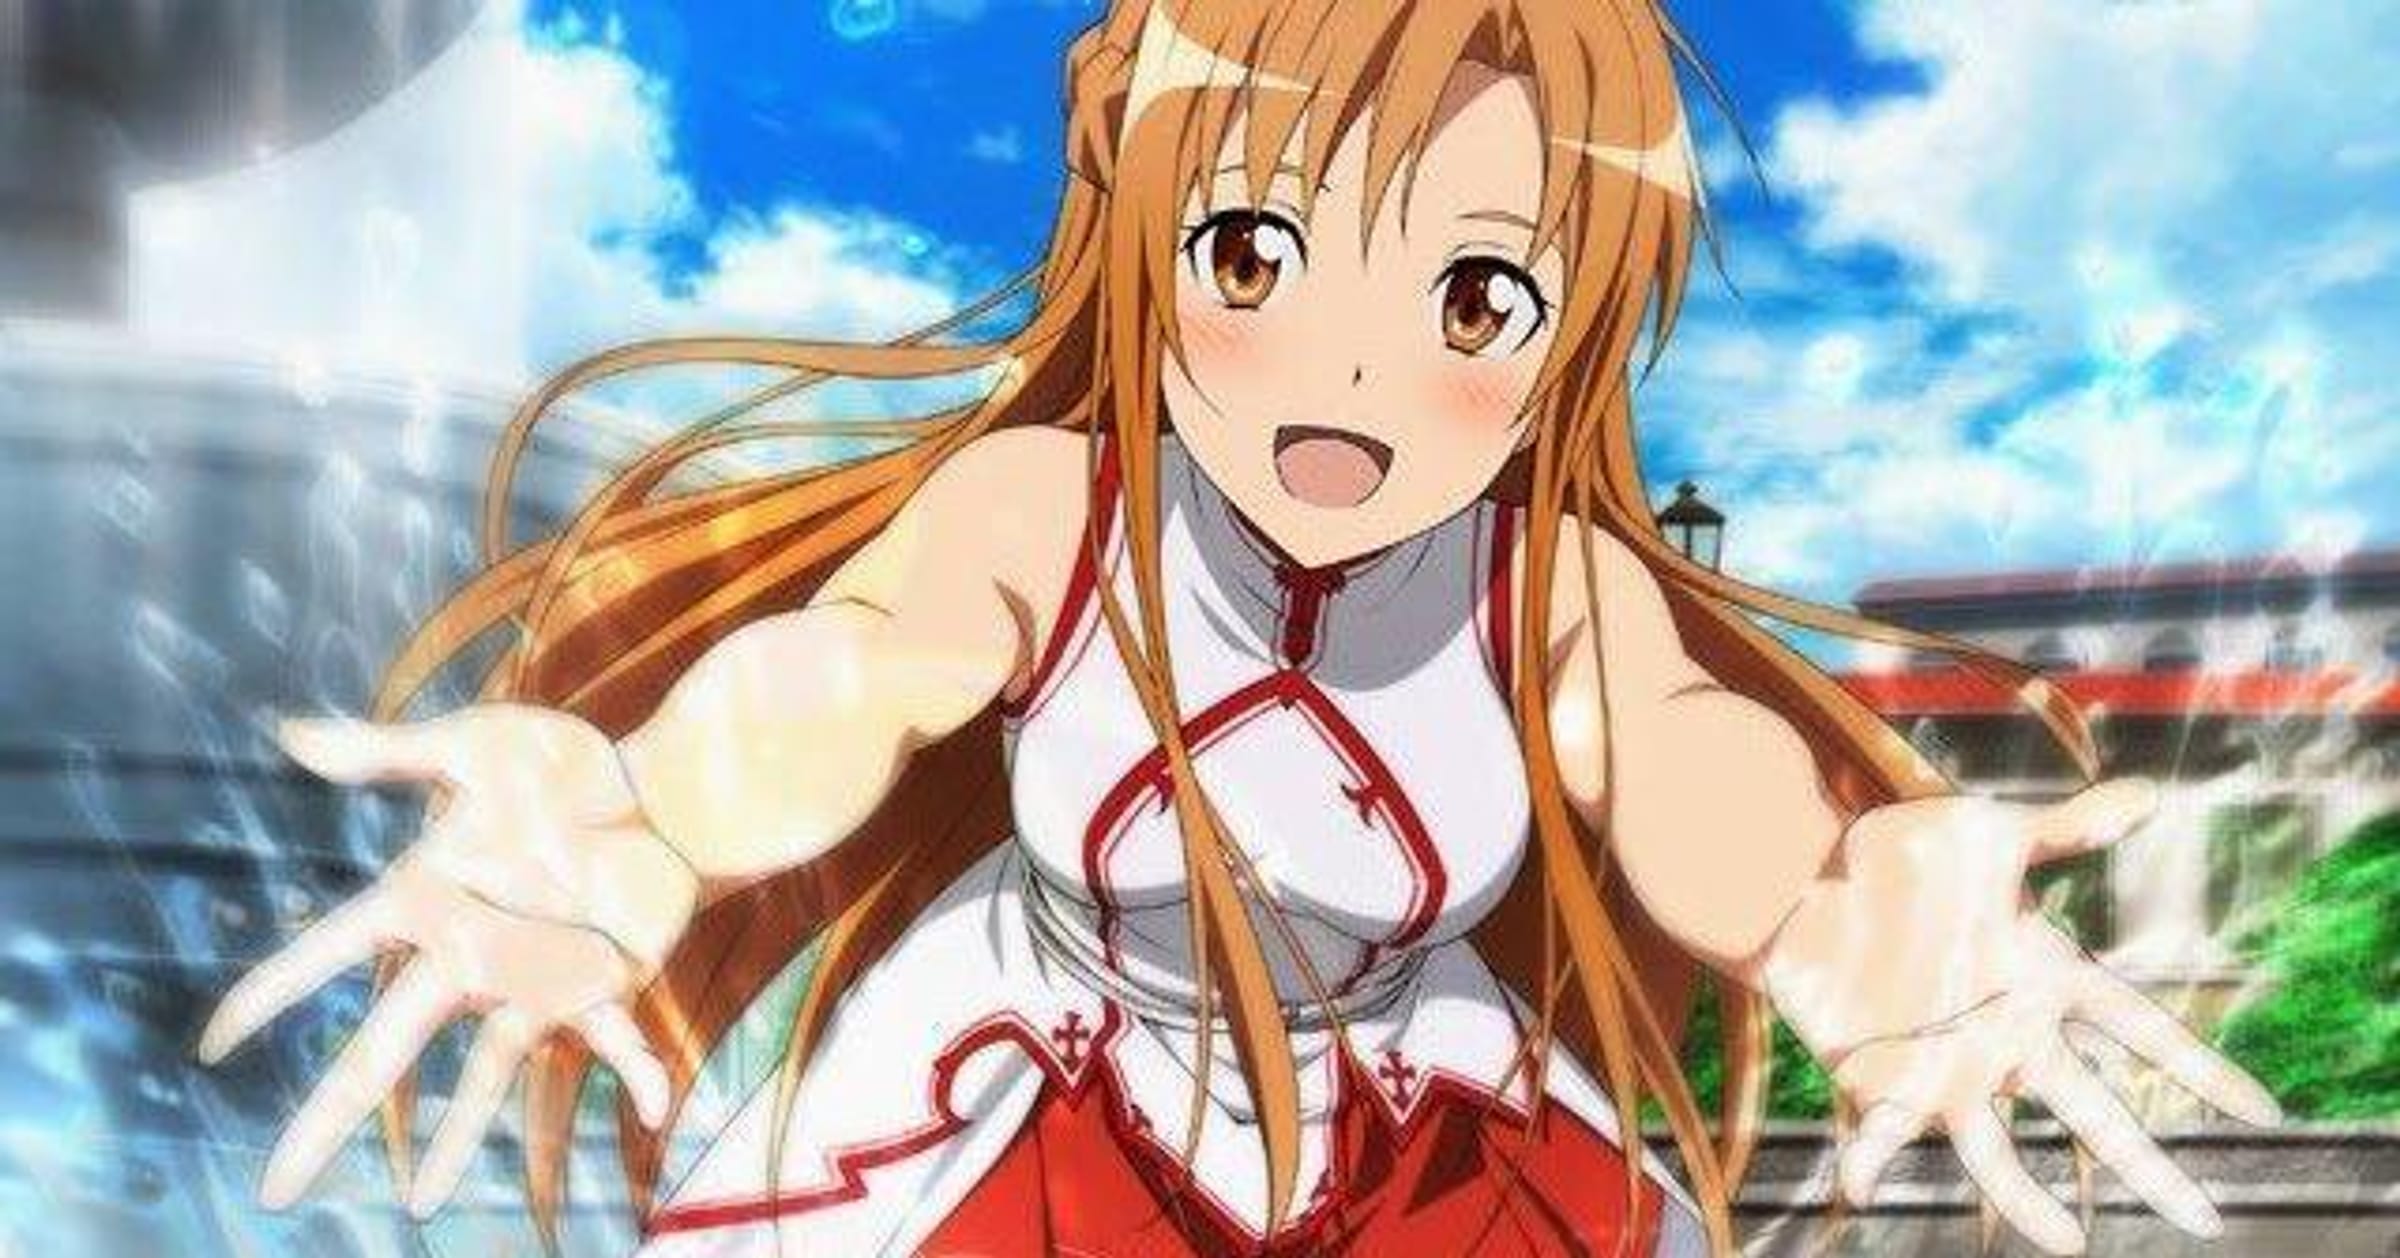 Top 8 most attractive female anime characters, based on fan votes on Ranker